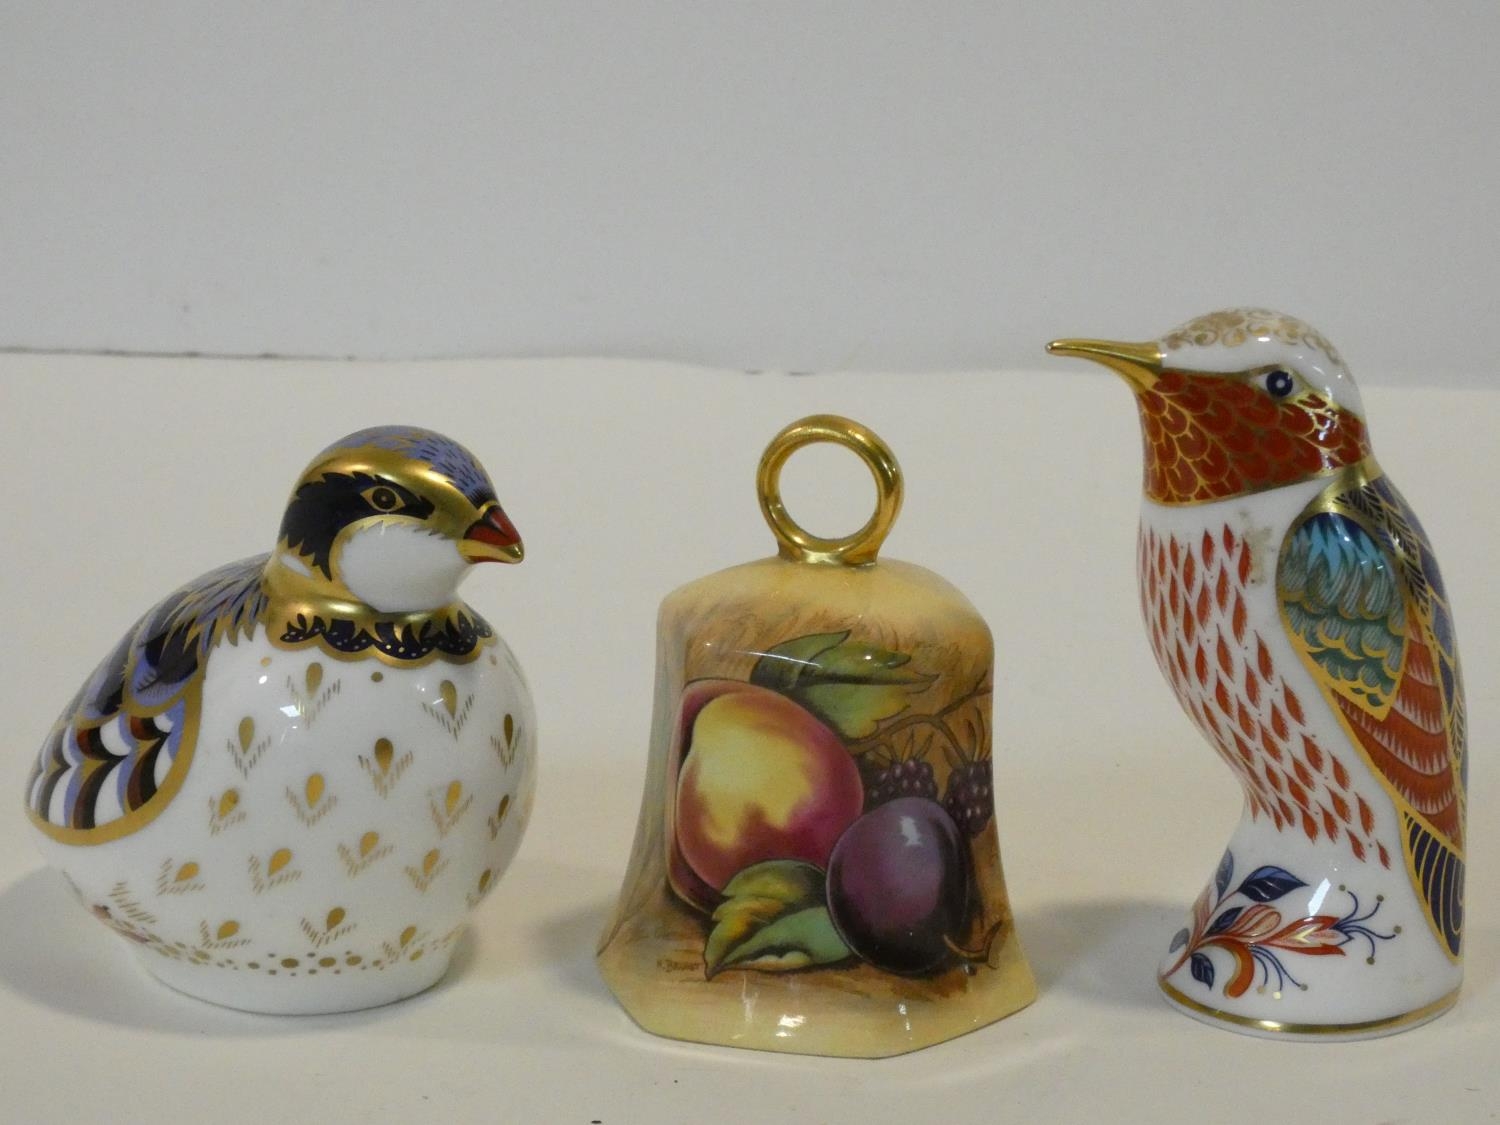 A collection of porcelain items. Including an Aynsley Orchard Gold fruit design hand bell along with